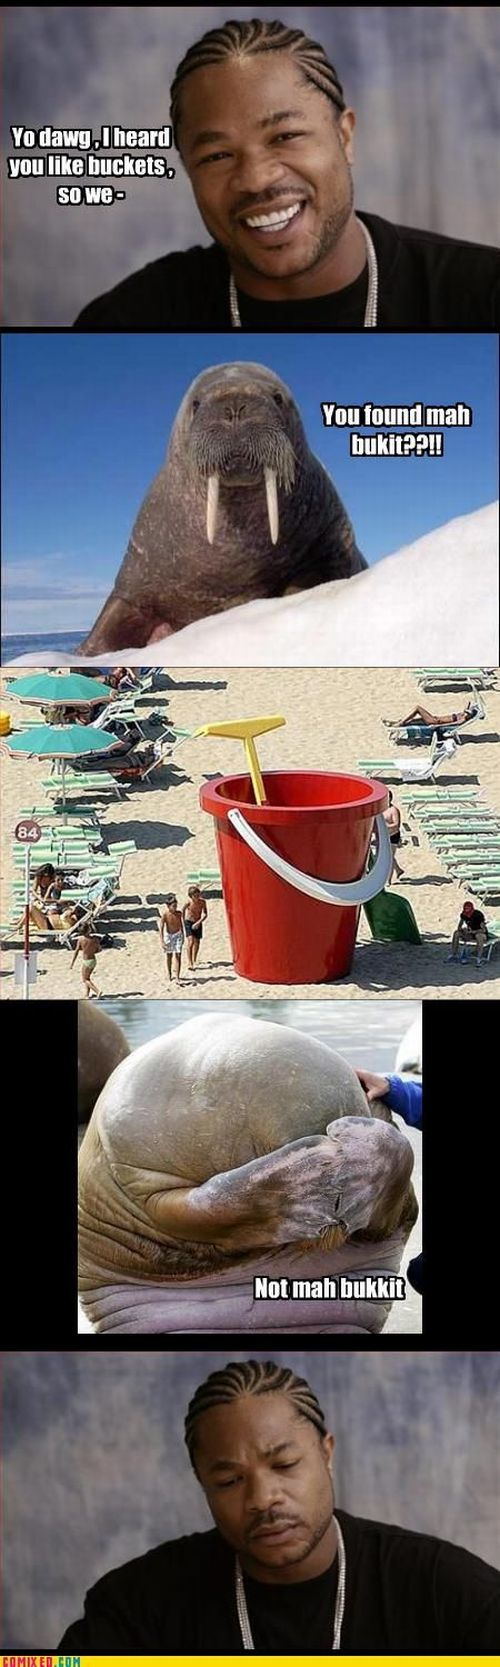 Funny commixed pictures. Part 2 (40 pics)